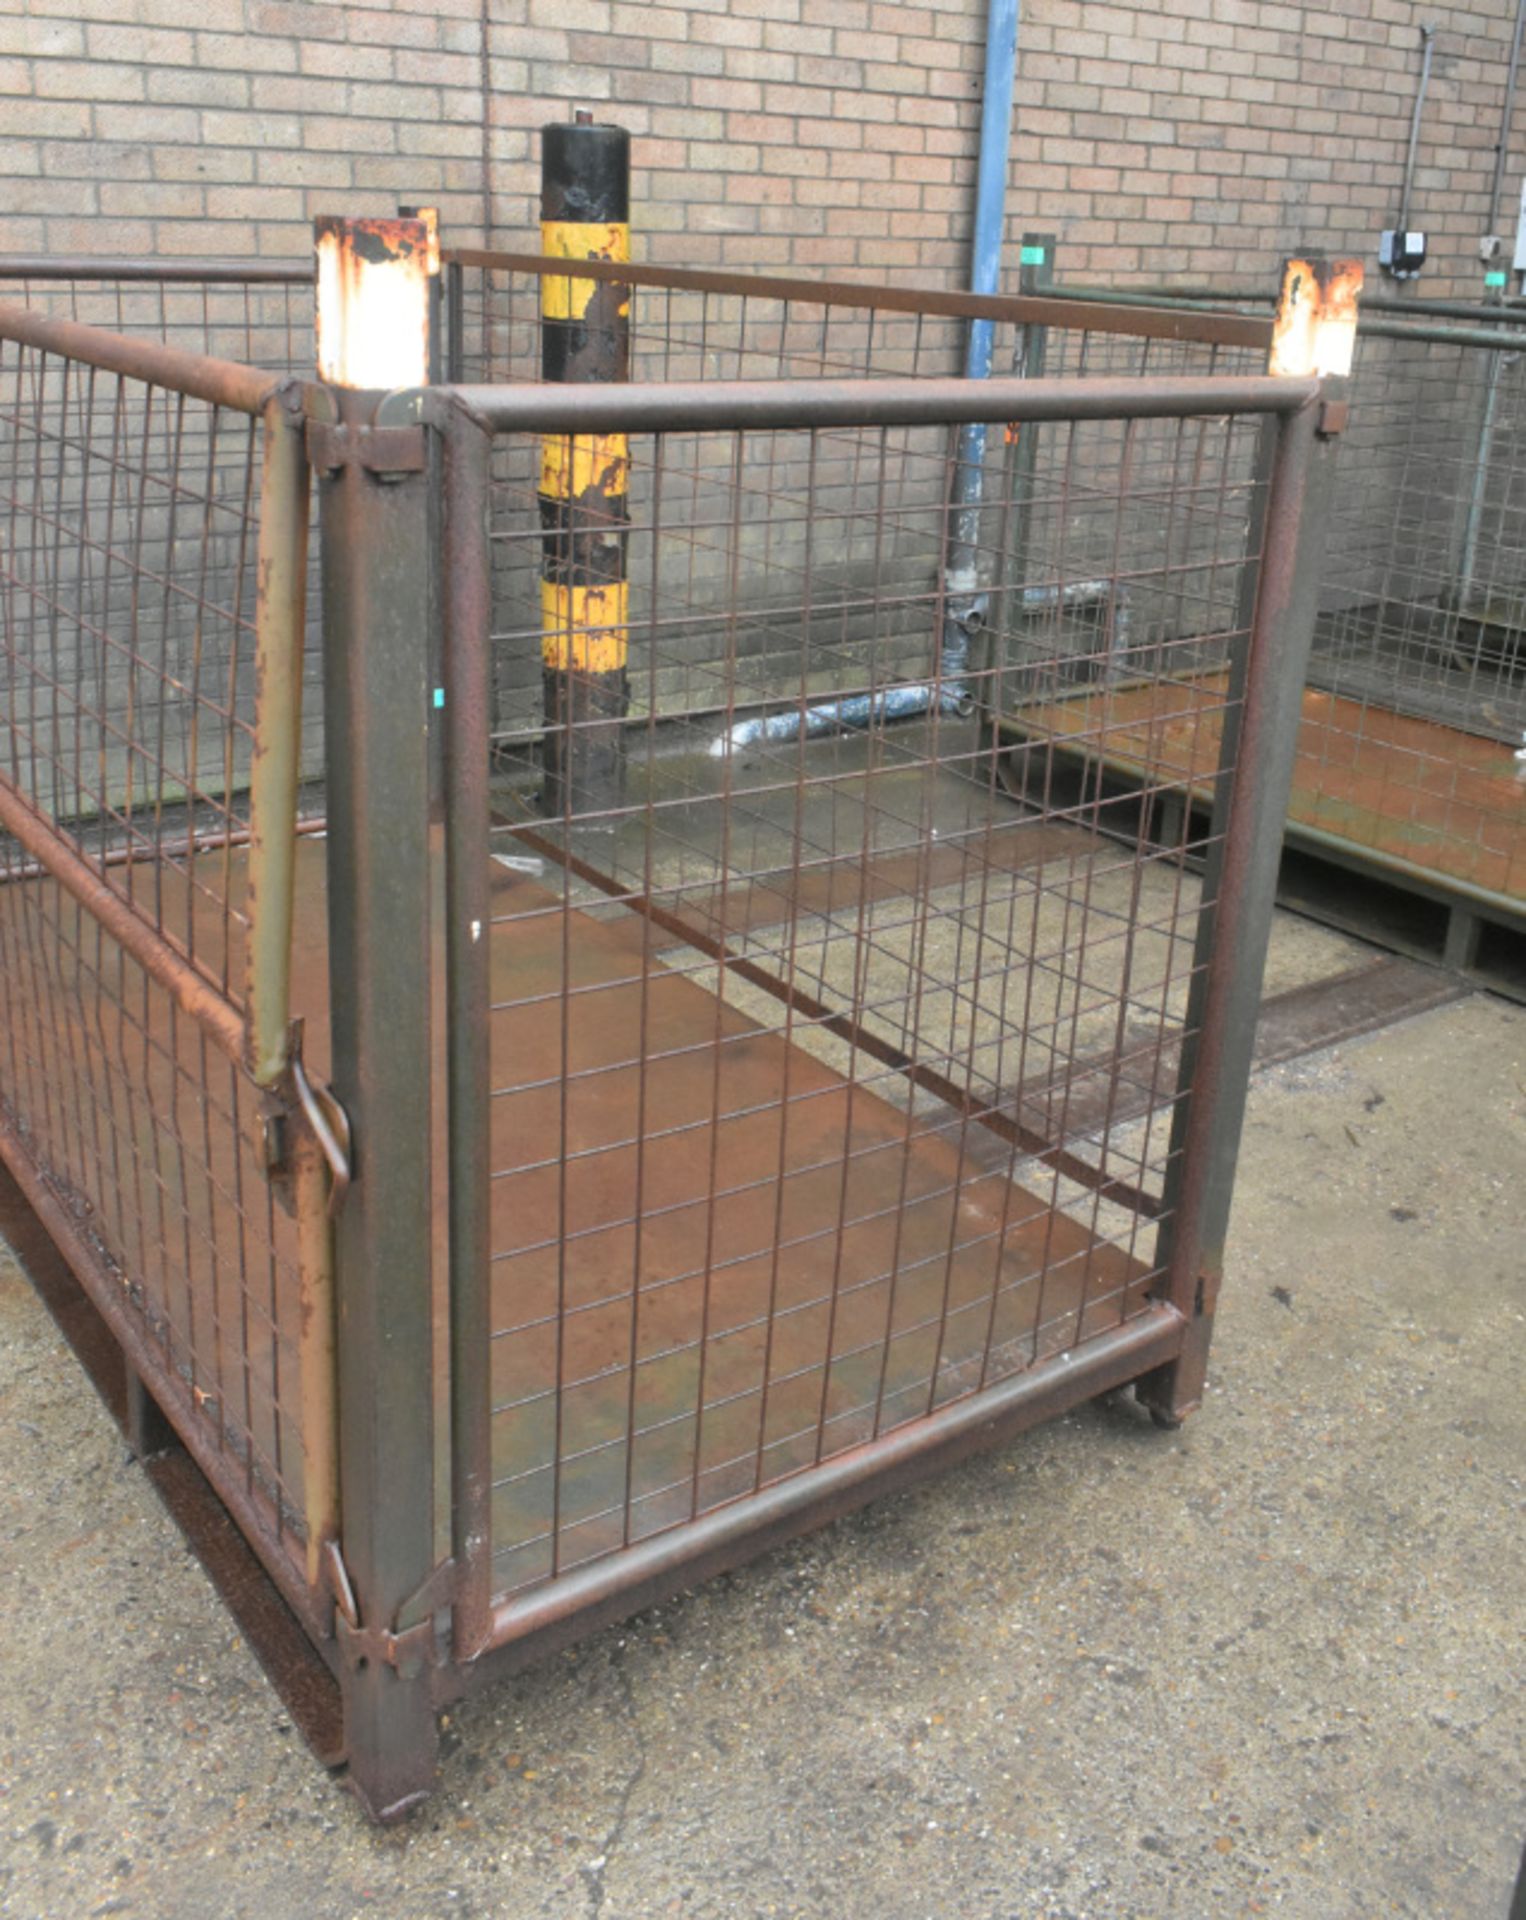 Longspan Metal Stillage - External dimensions L213 x W113 x H143cm - PLEASE SEE PICTURES FOR CONDITI - Image 2 of 3